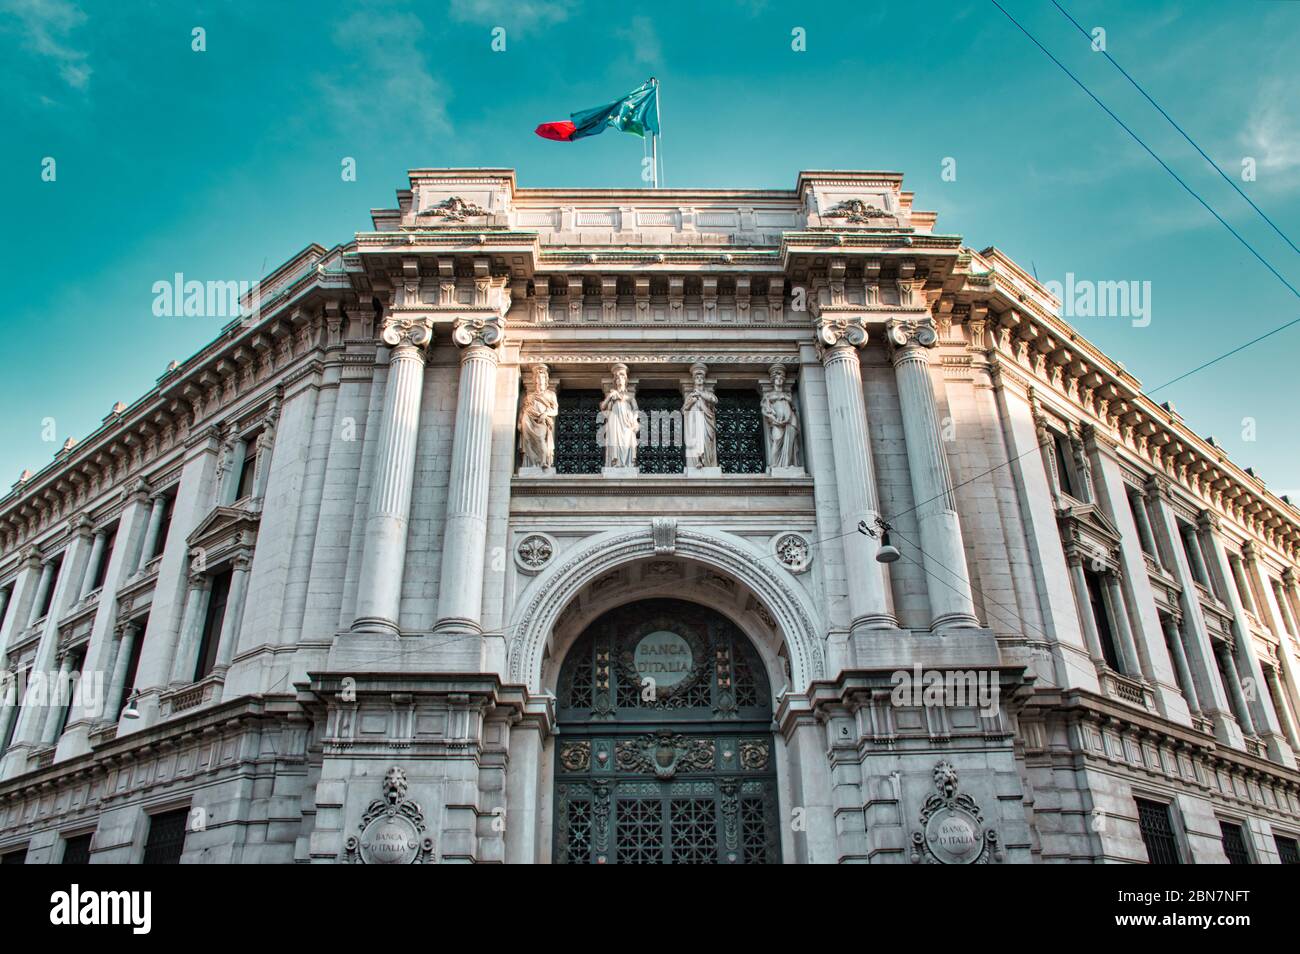 Bank Of Italy High Resolution Stock Photography And Images Alamy